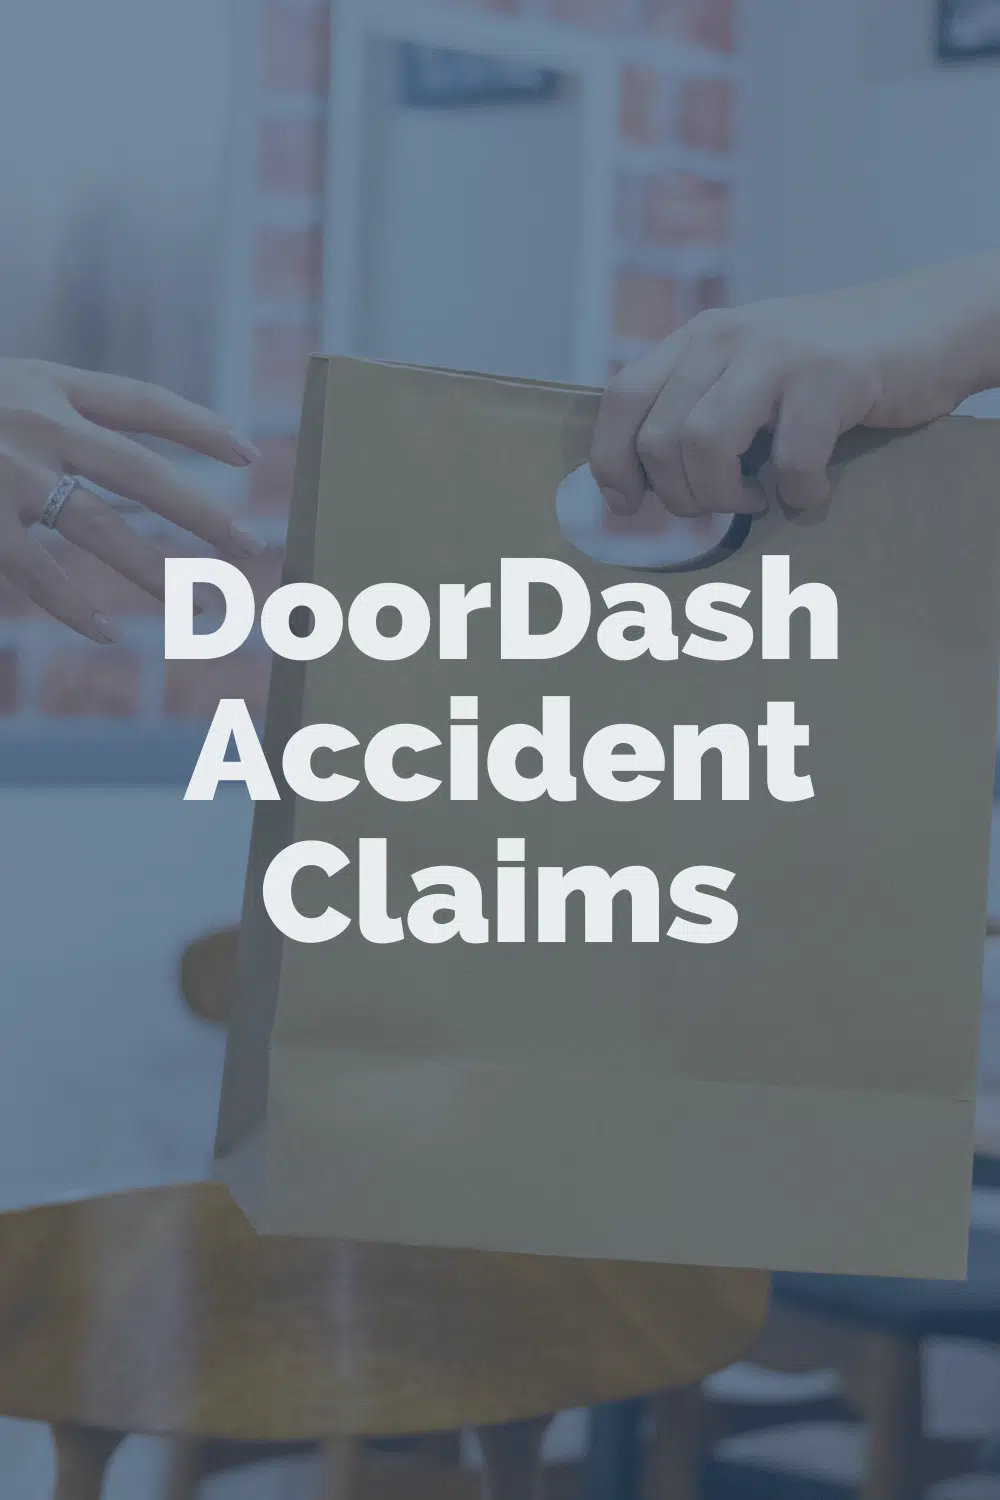 DoorDash Accident Claim: What You Need To Know